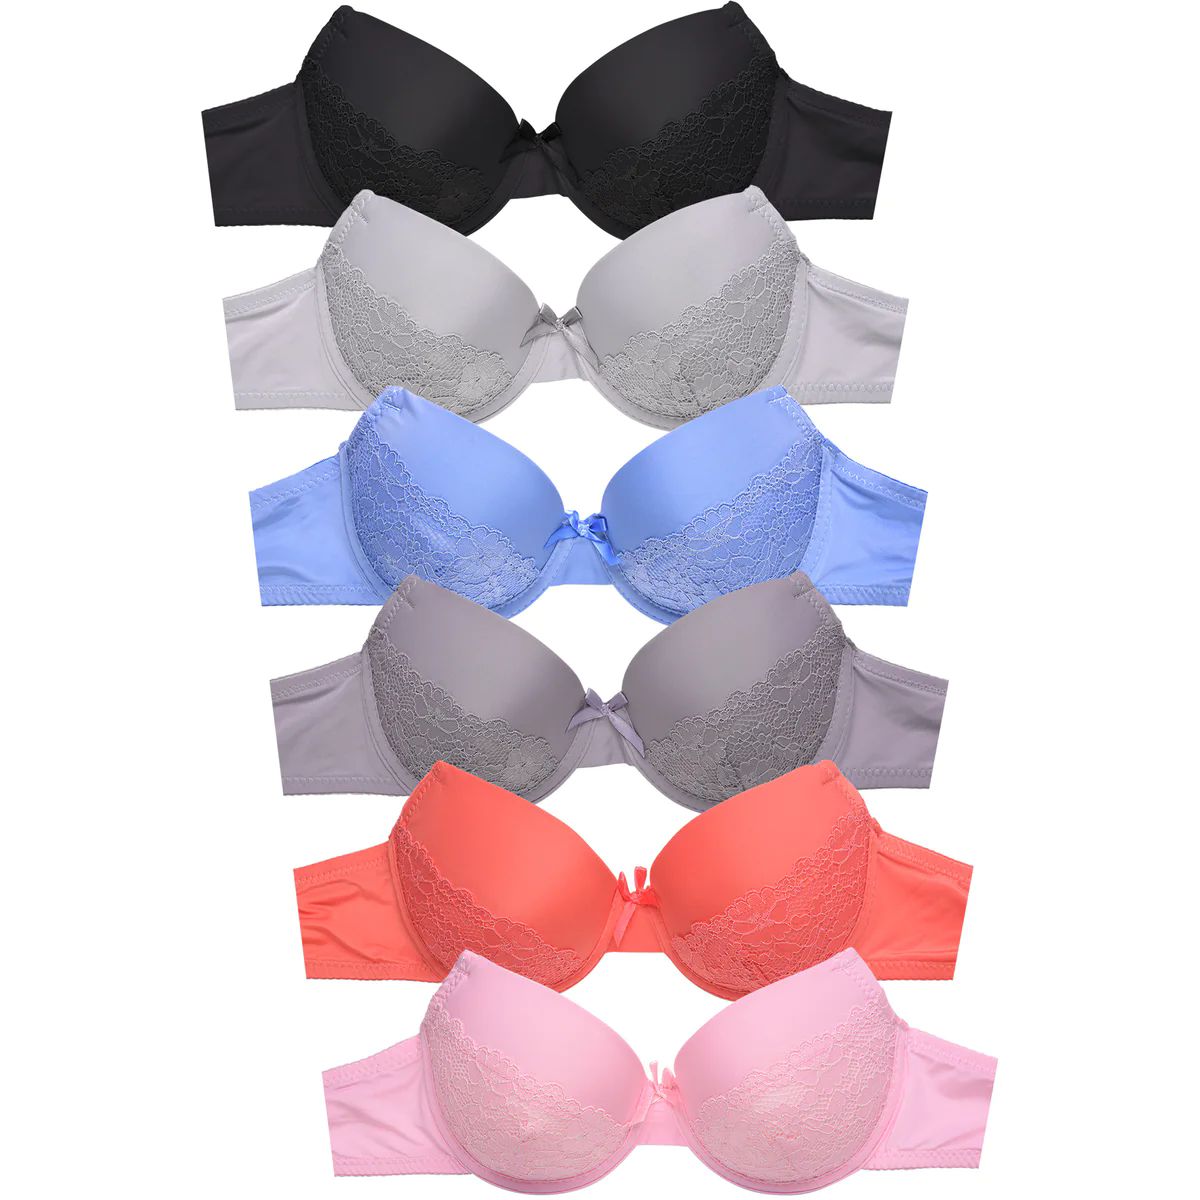 288 Wholesale Mamia Ladies Plain/lace Bra, Strapless, Assorted Sizes B Cup